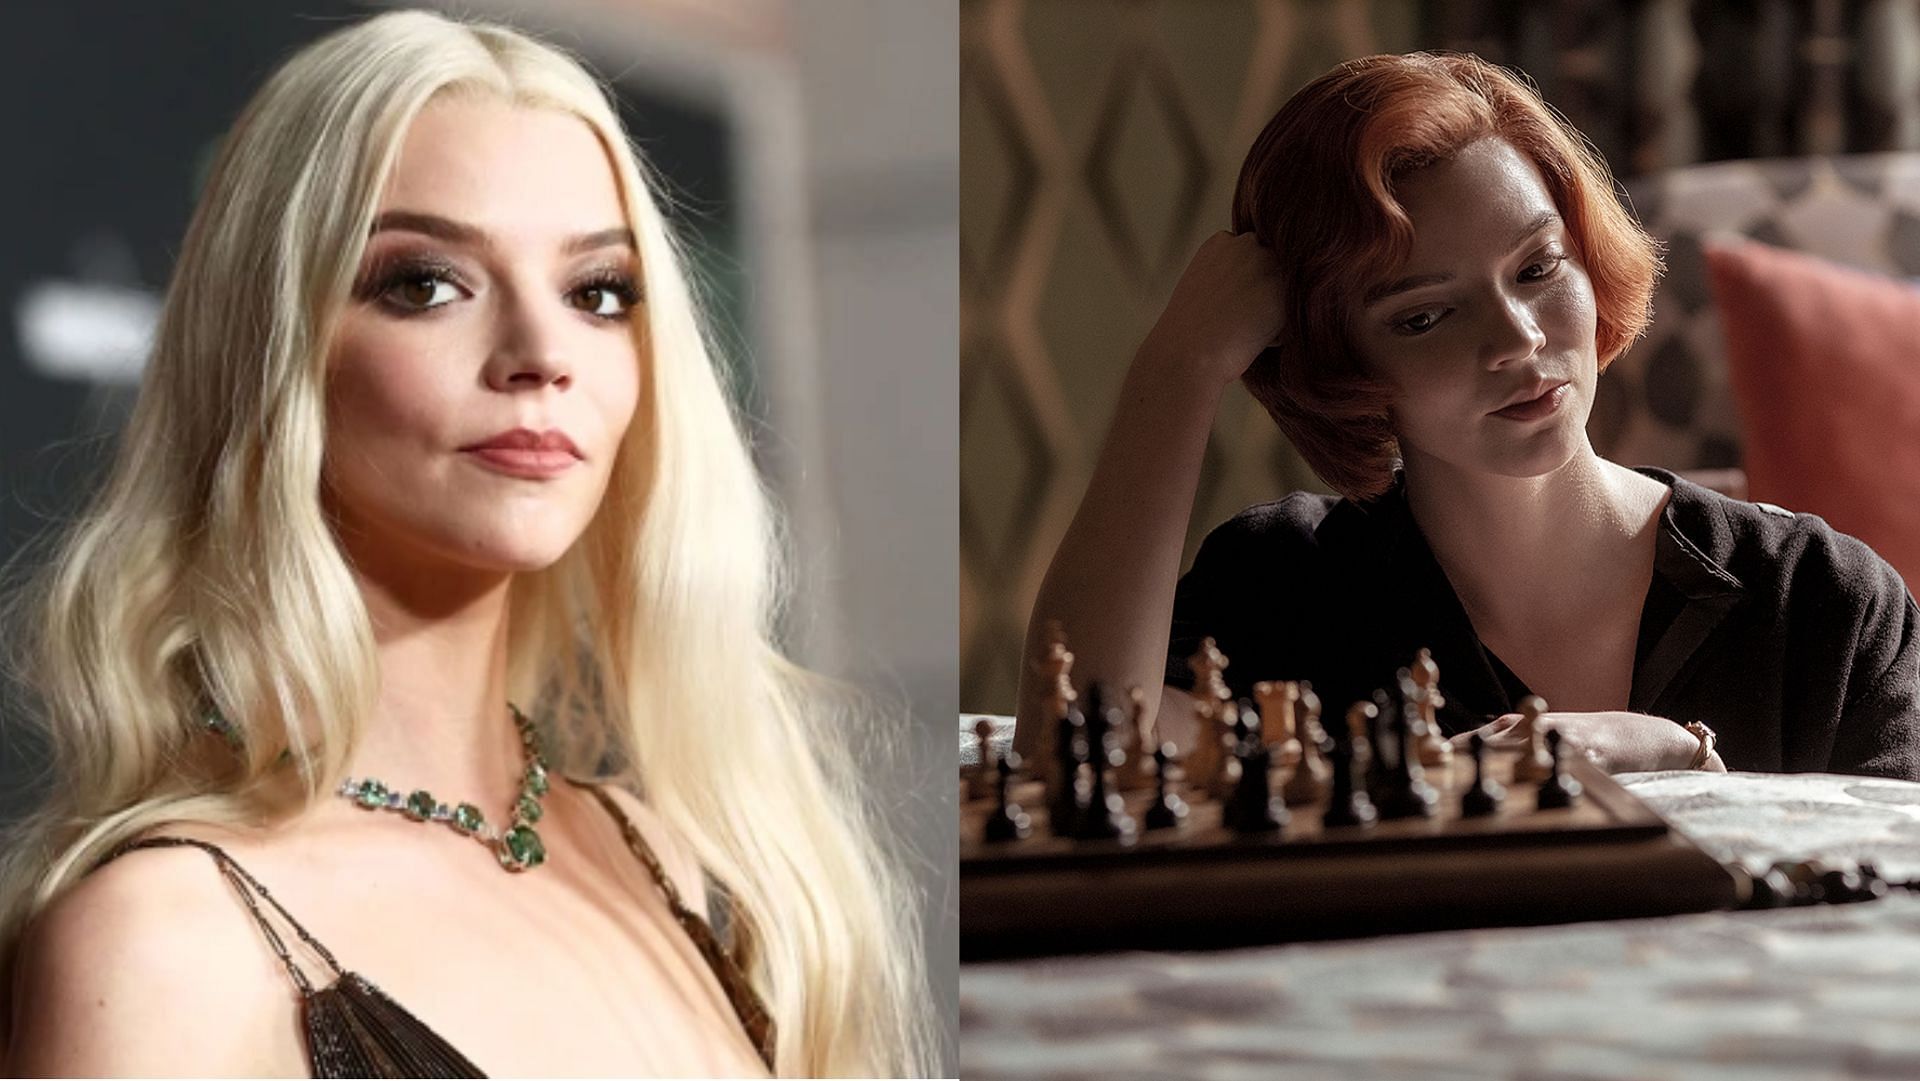 Download Queen's Gambit stars Anya Taylor-Joy as Beth Harmon and